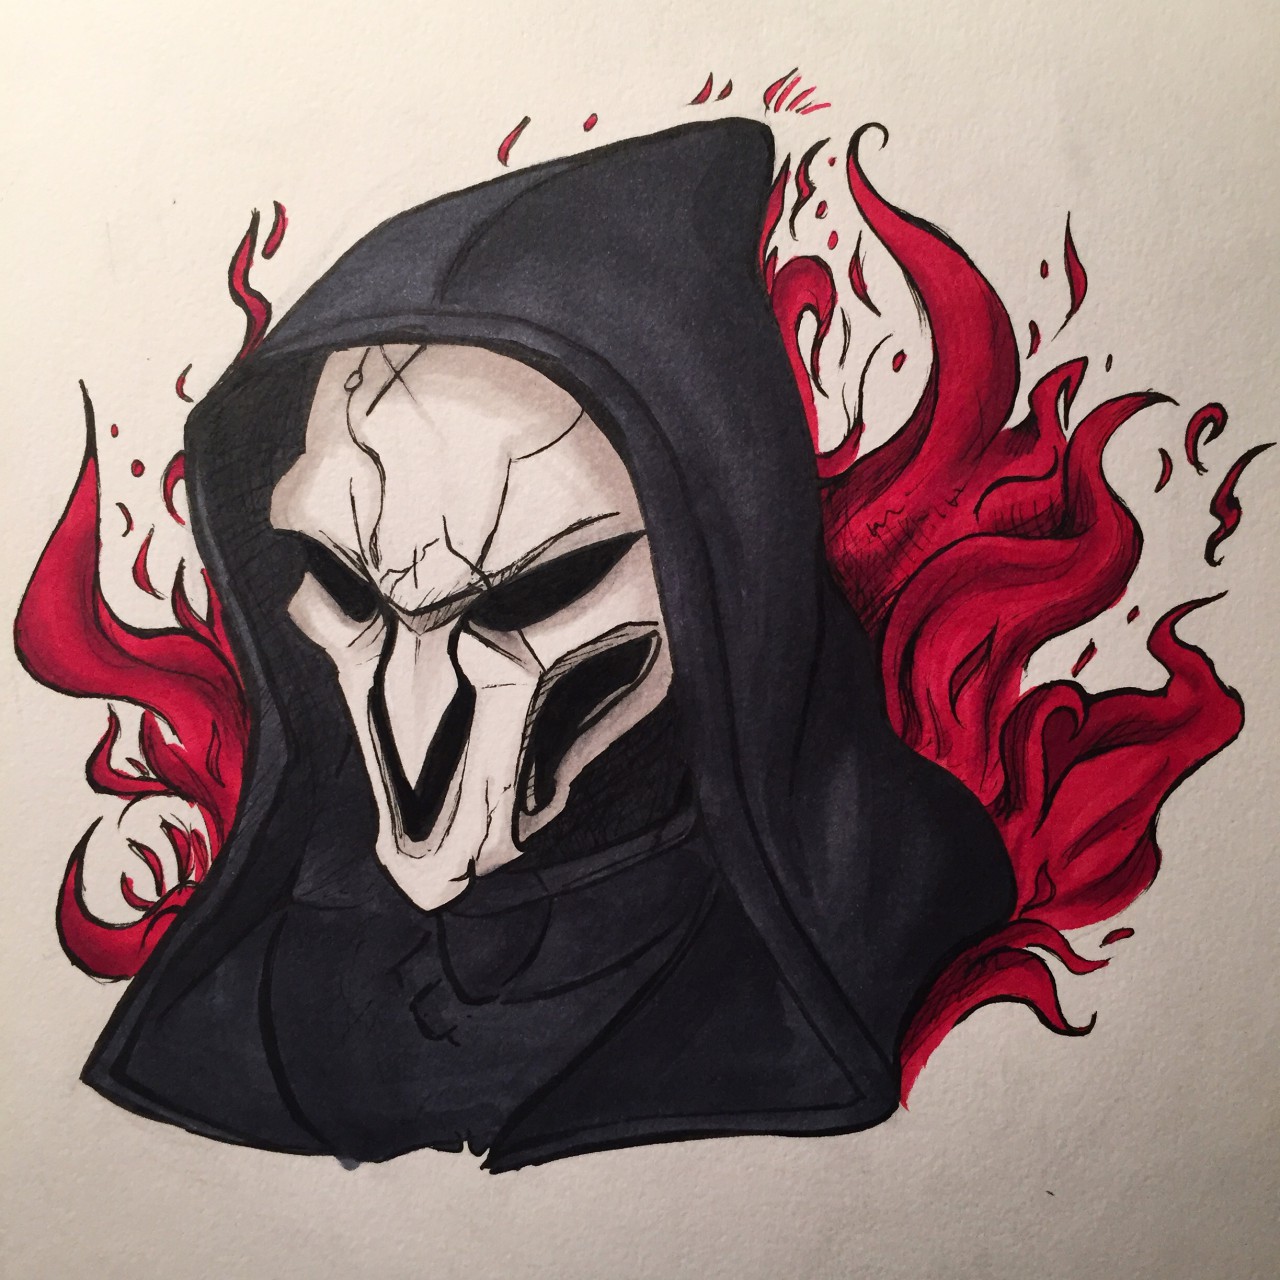 How To Draw Overwatch Reaper Drawing the result or the act of making an